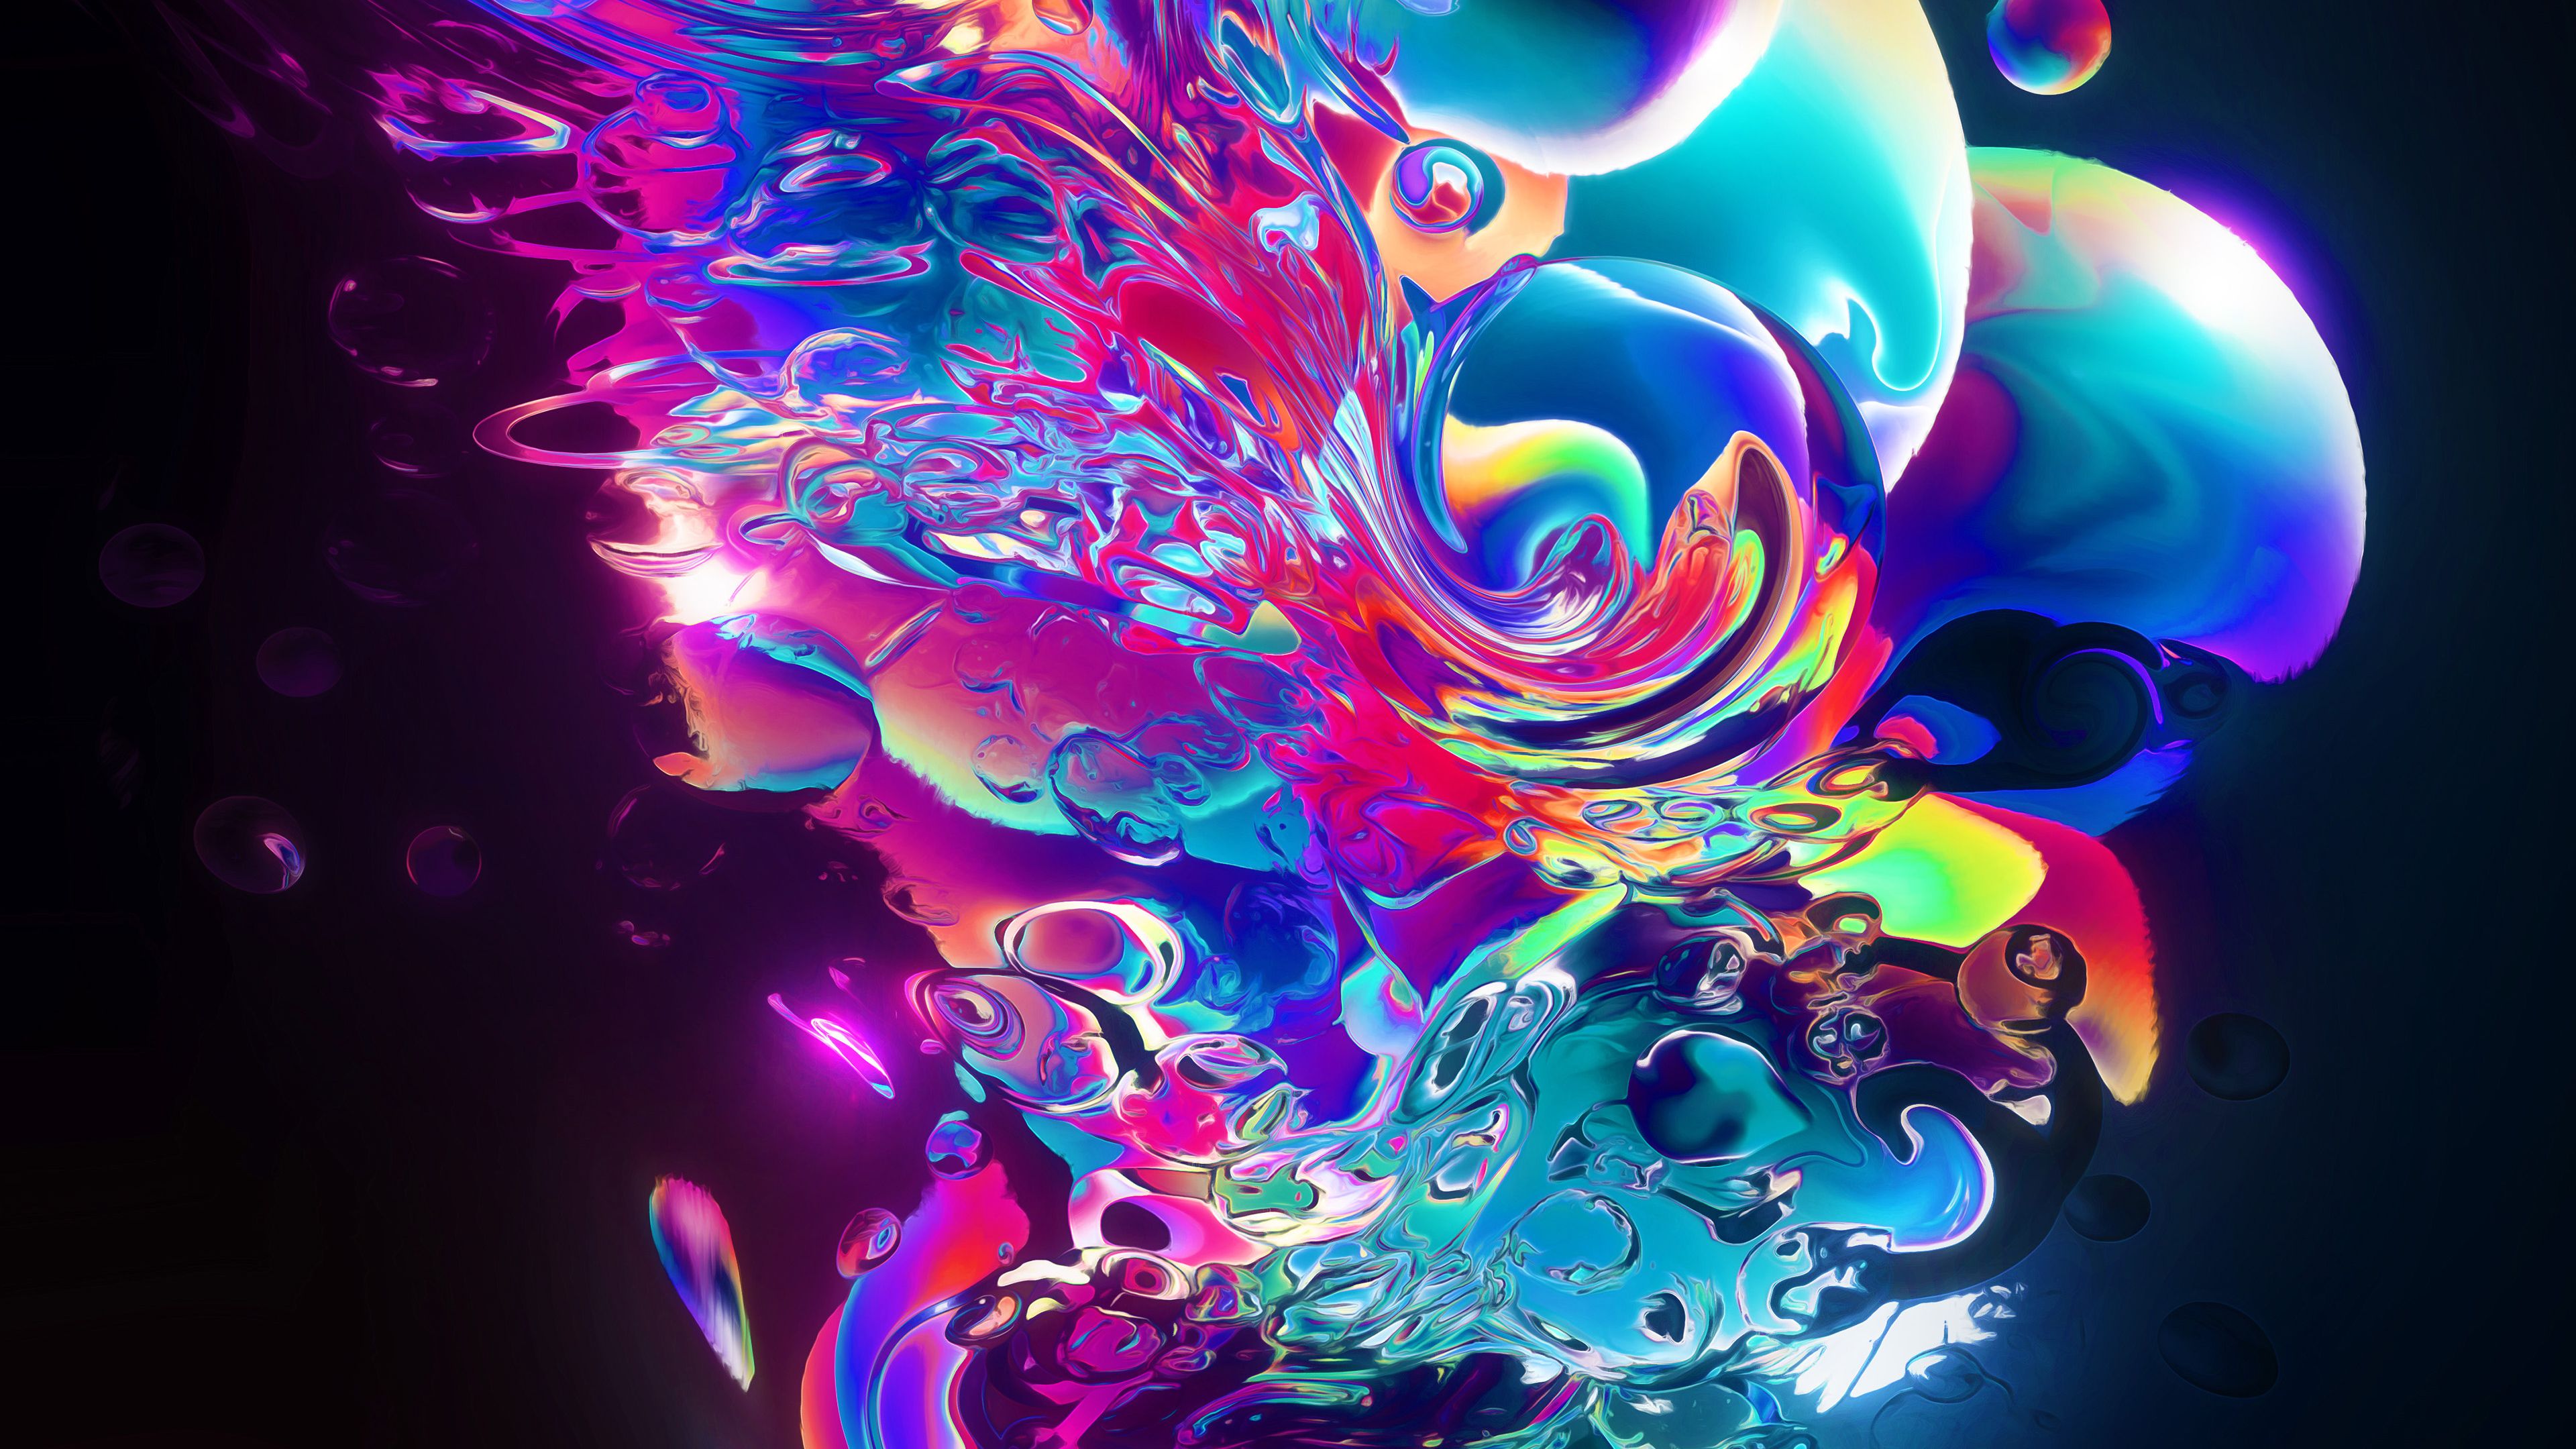 Abstract Art Wallpapers - 4k, HD Abstract Art Backgrounds on WallpaperBat